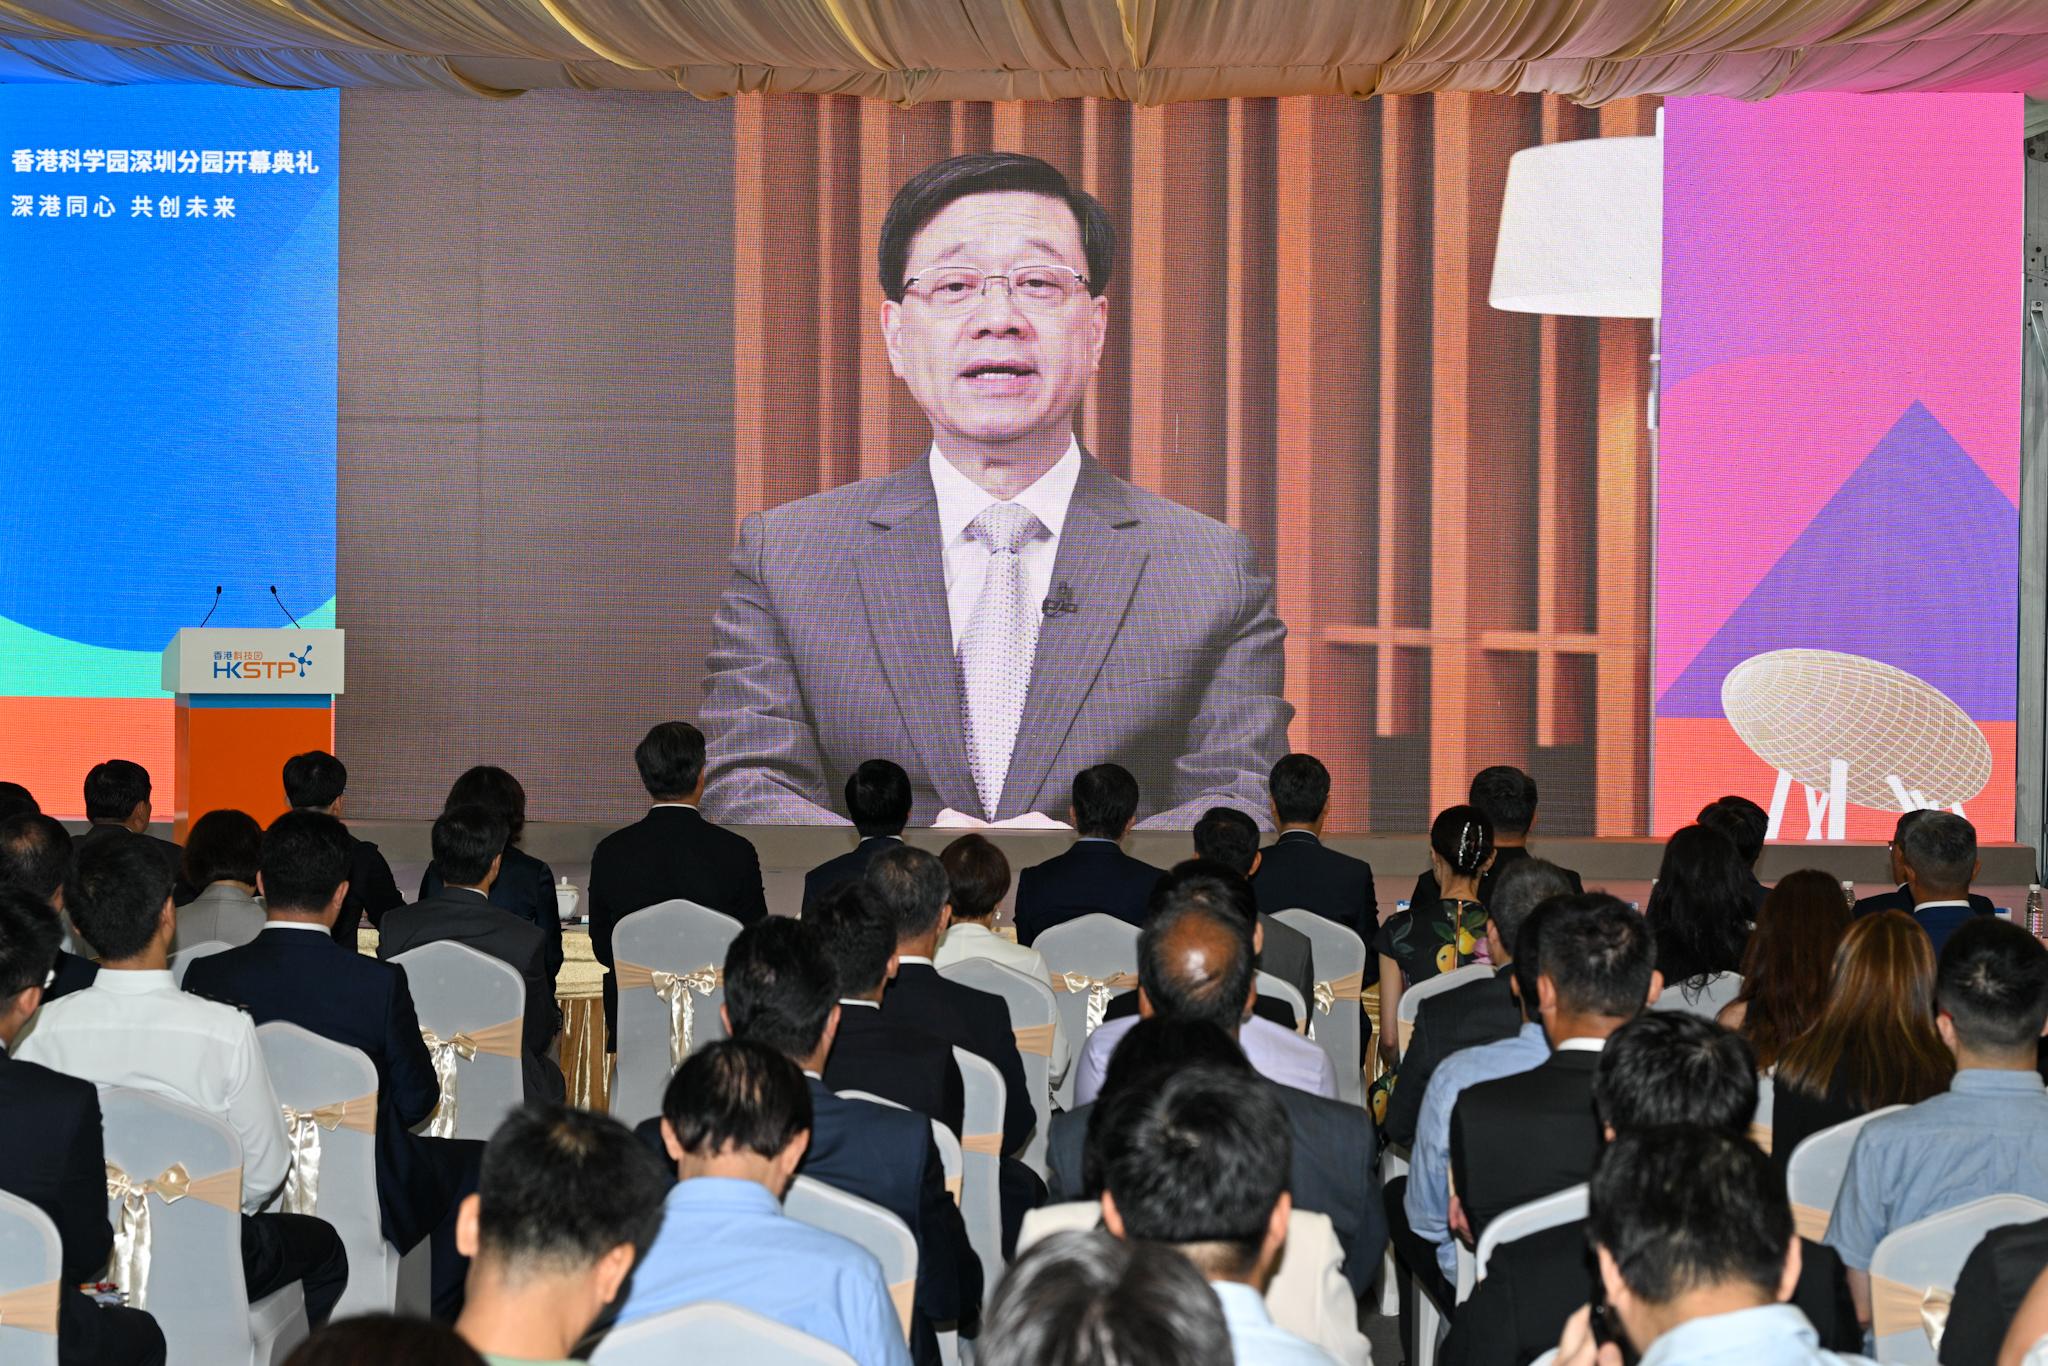 The Chief Executive, Mr John Lee, today (September 7) attended the Hong Kong Science Park Shenzhen Branch opening ceremony via video conferencing, witnessing another important milestone in innovation and technology  co-operation between Hong Kong and Shenzhen. Photo shows Mr Lee his delivering speech at the opening ceremony.